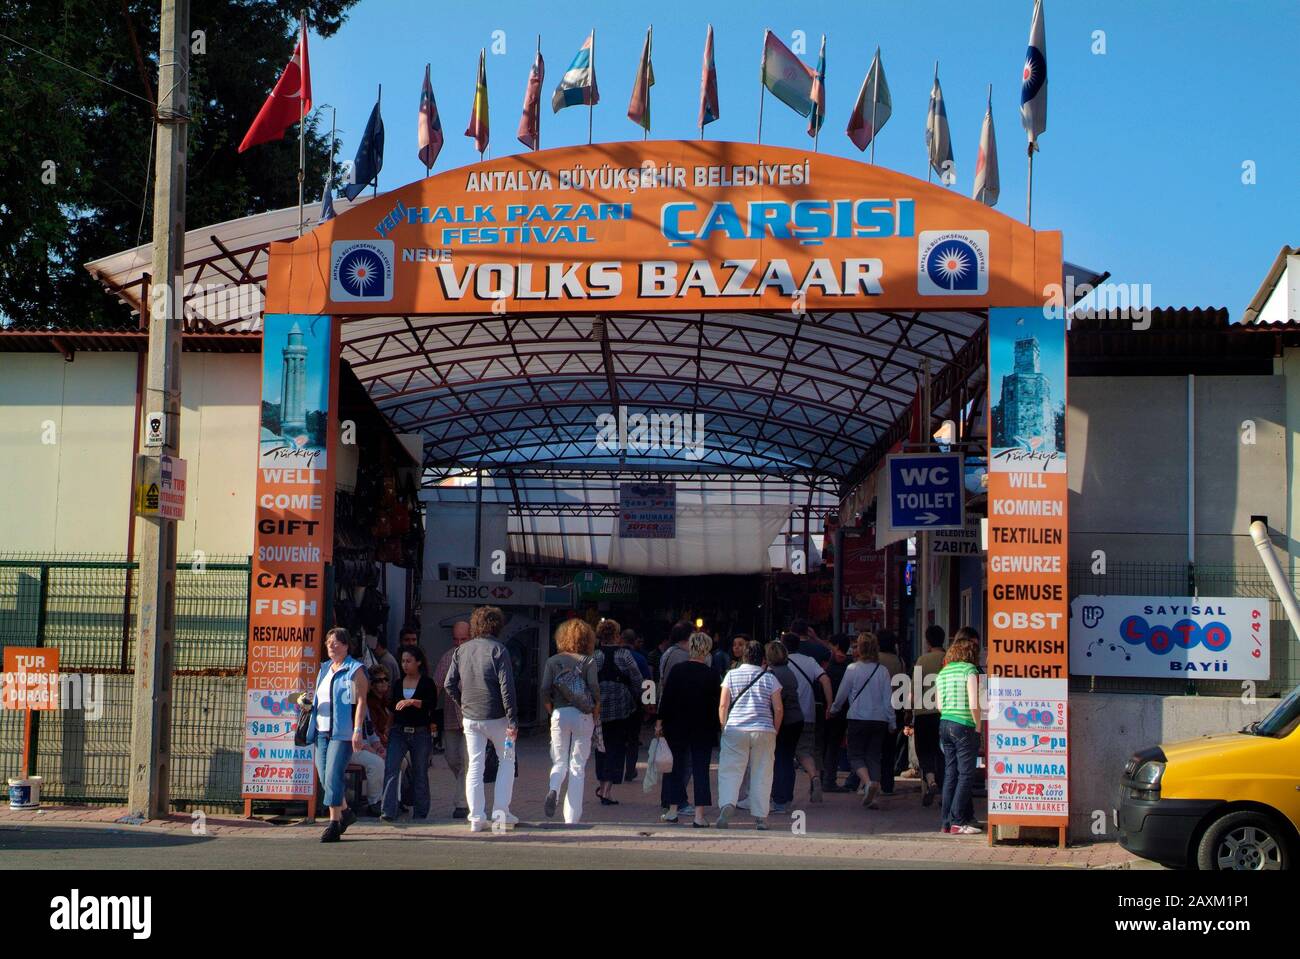 Alanya, Turkey - April 10, 2009: Unidentified people on entrance to big bazaar, shopping mall for tourists Stock Photo